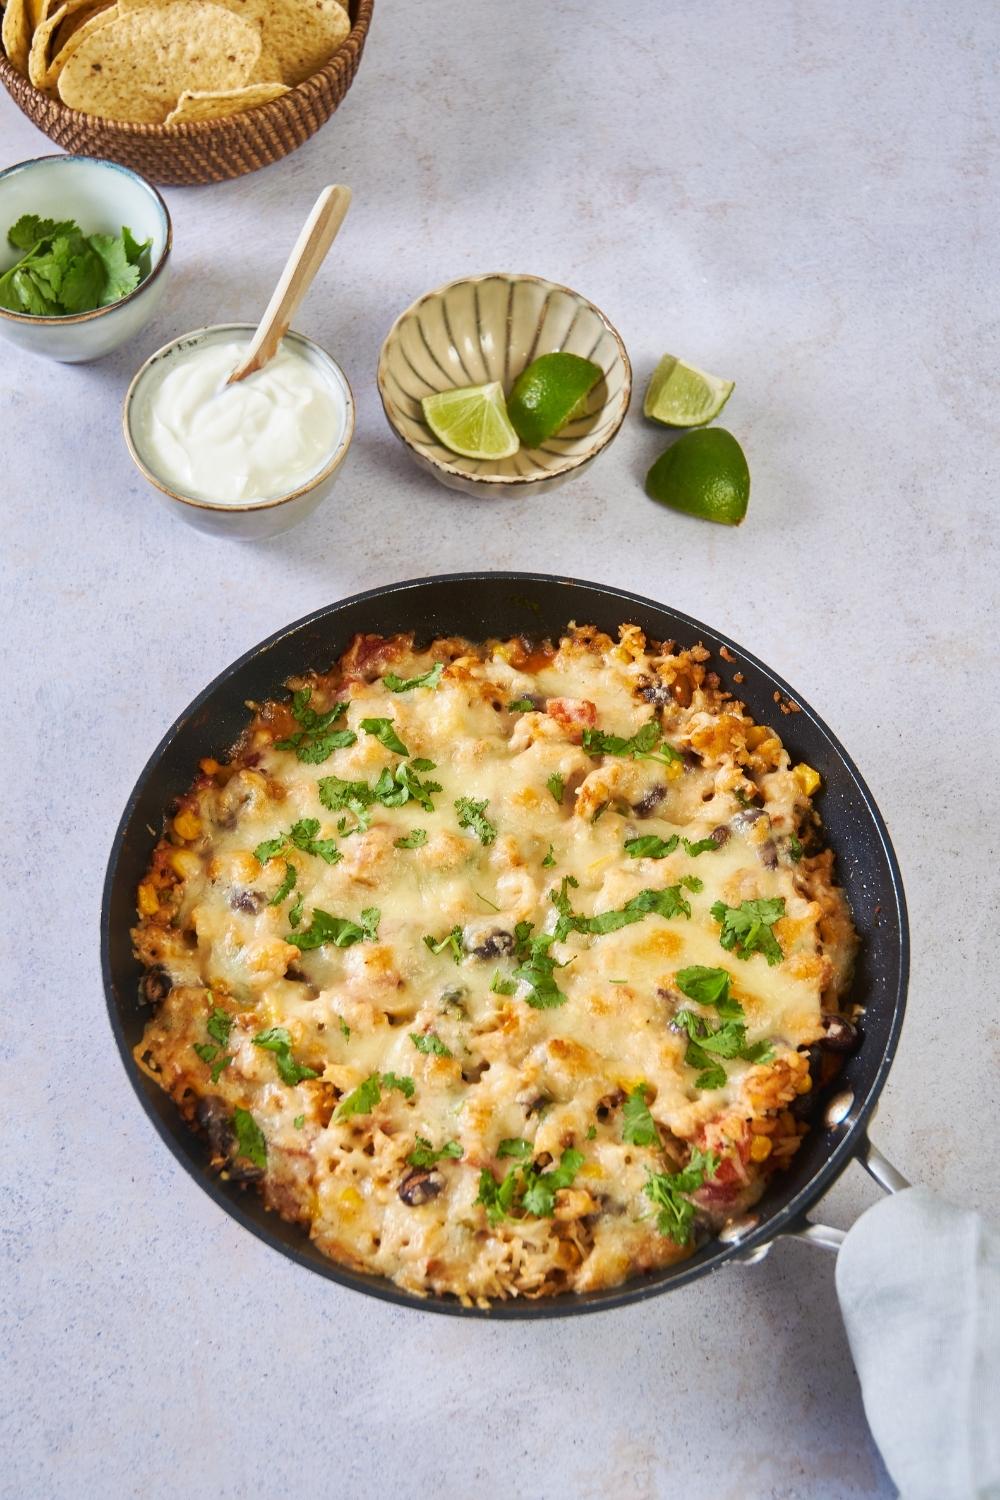 A black skillet filled with ground turkey, melted cheese, and cilantro. The skillet is next to bowls of lime wedges, sour cream, cilantro, and tortilla chips